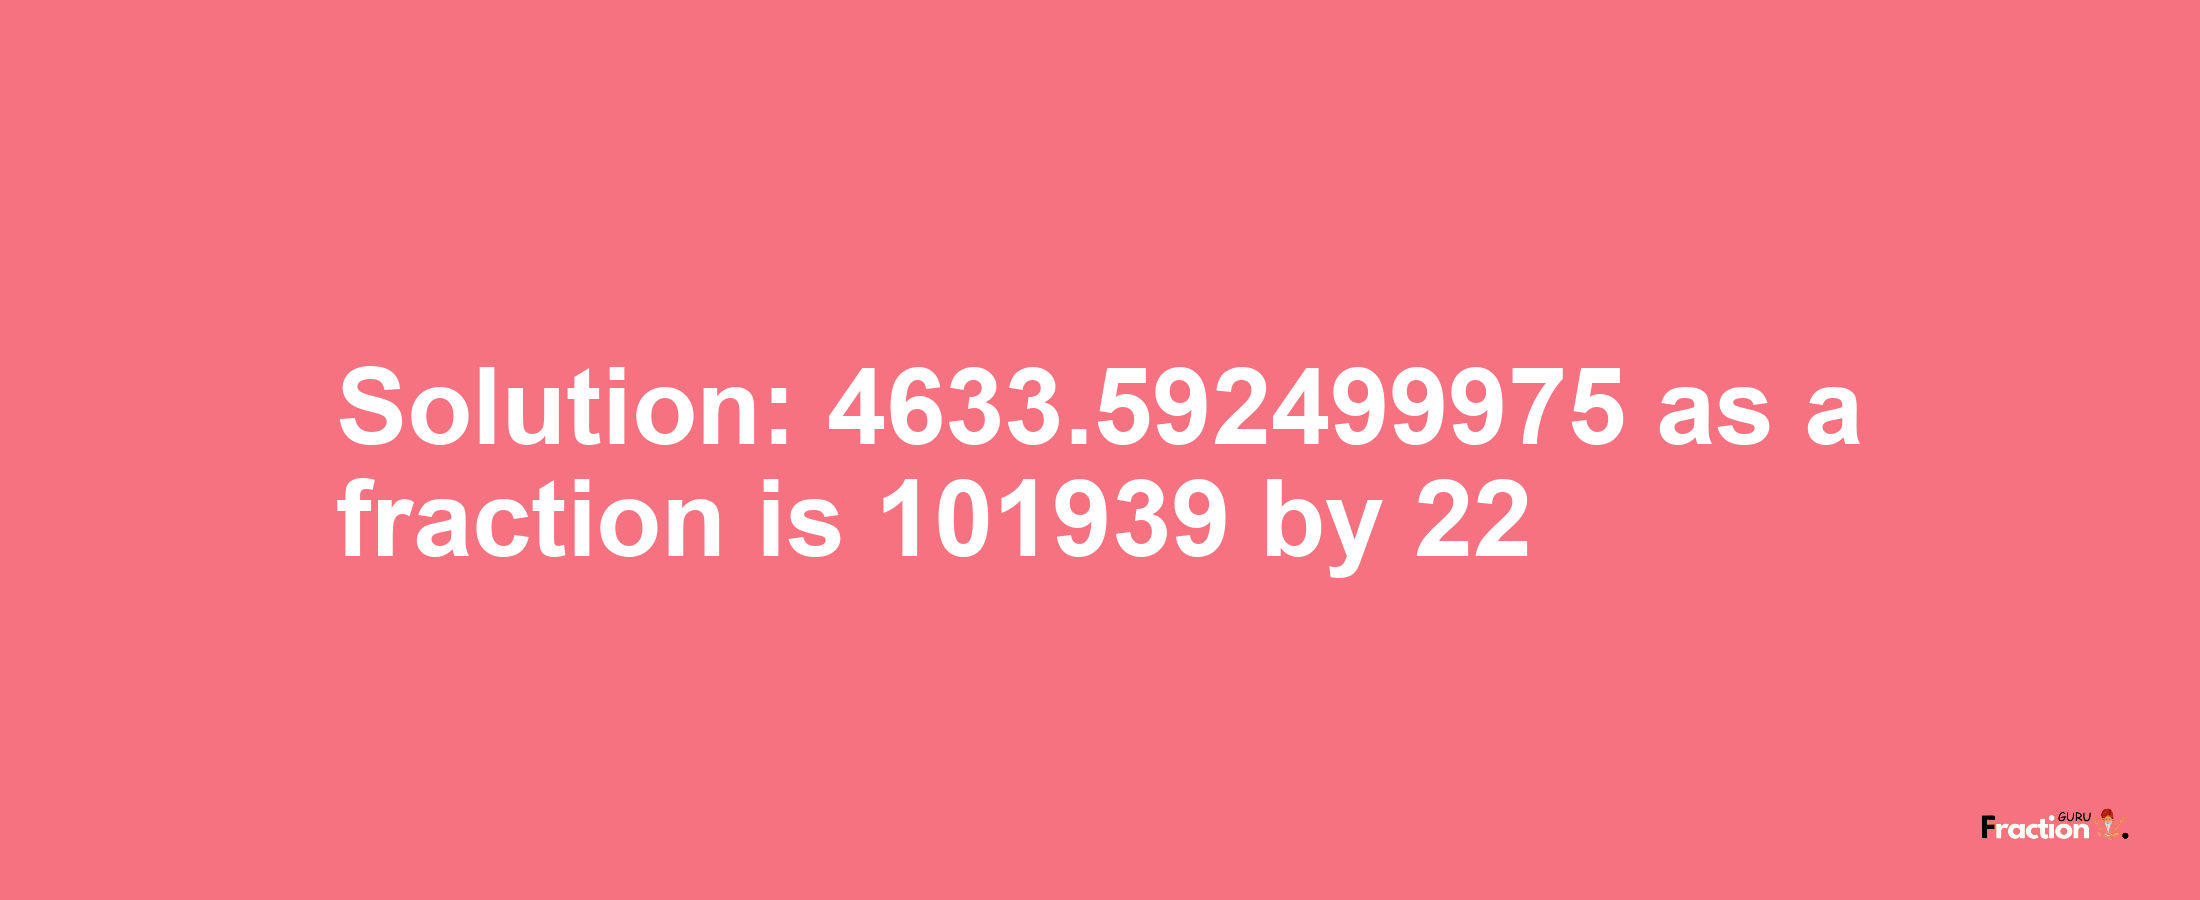 Solution:4633.592499975 as a fraction is 101939/22